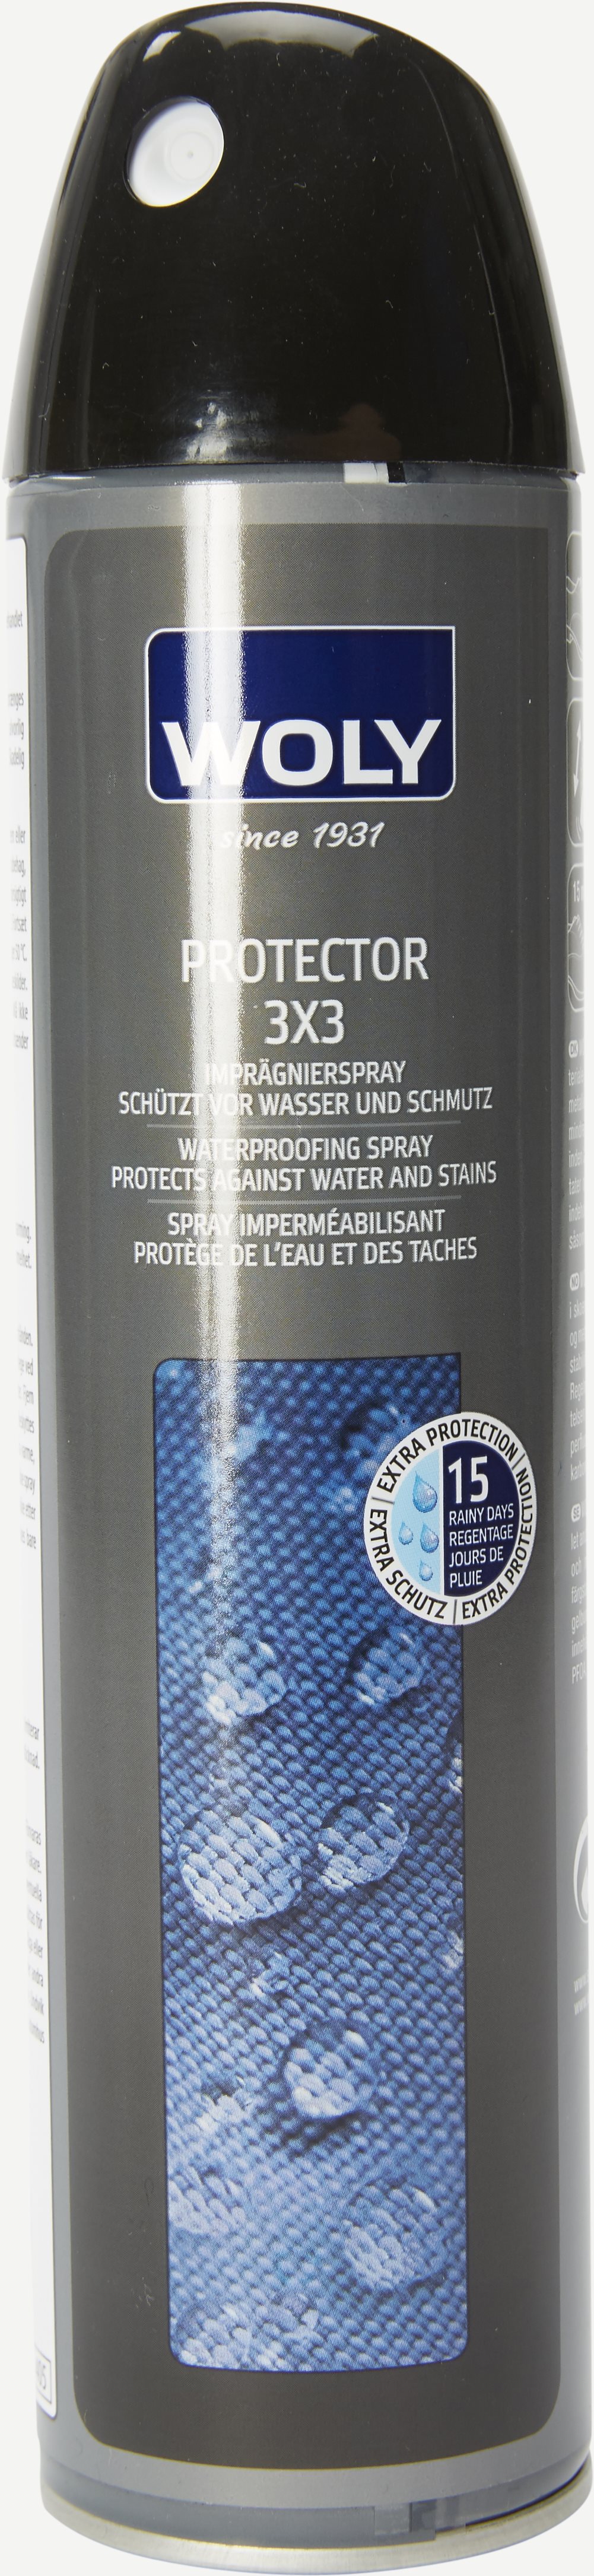 Woly Protector 3X3 Imprænering - Accessories - Grå